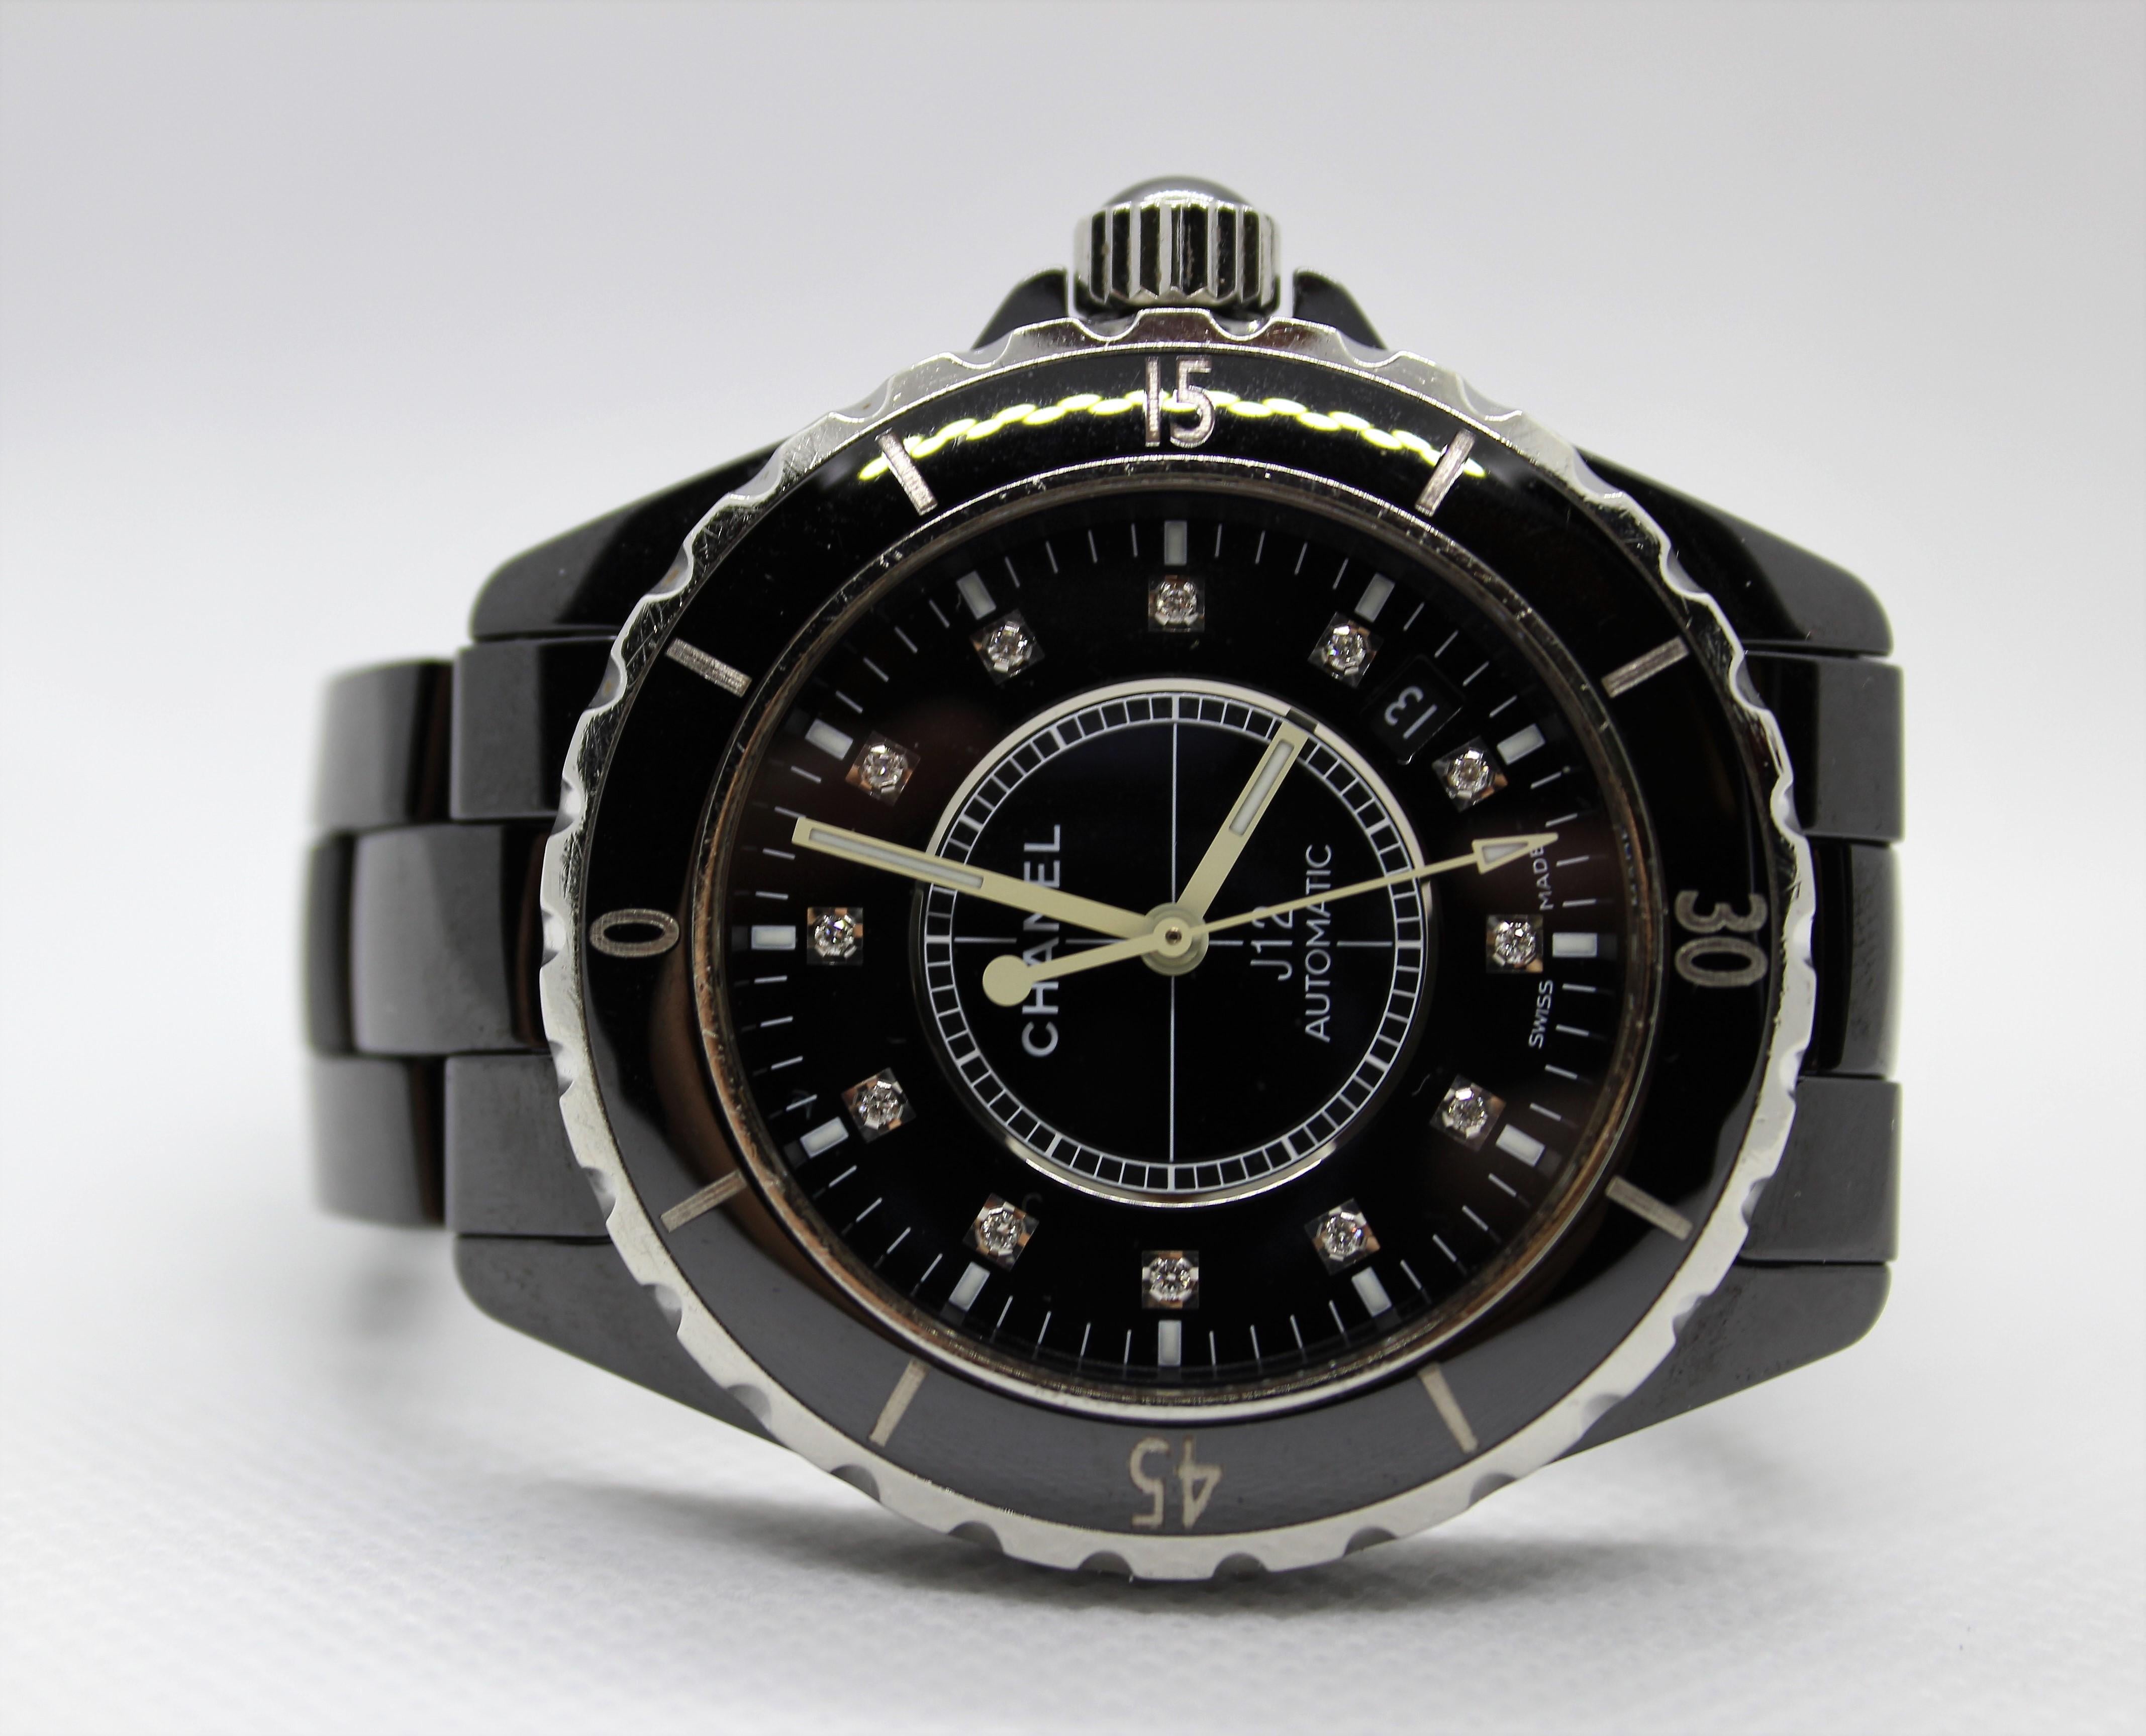 Materials:

Black ceramic
Steel
Diamond

Case: Black high-tech ceramic and steel case

Bezel: Steel unidirectional rotating bezel

Dial: Black-lacquered dial set with 12 diamond indicators (~0.09 carat)

Crown
Steel screw-down crown with black